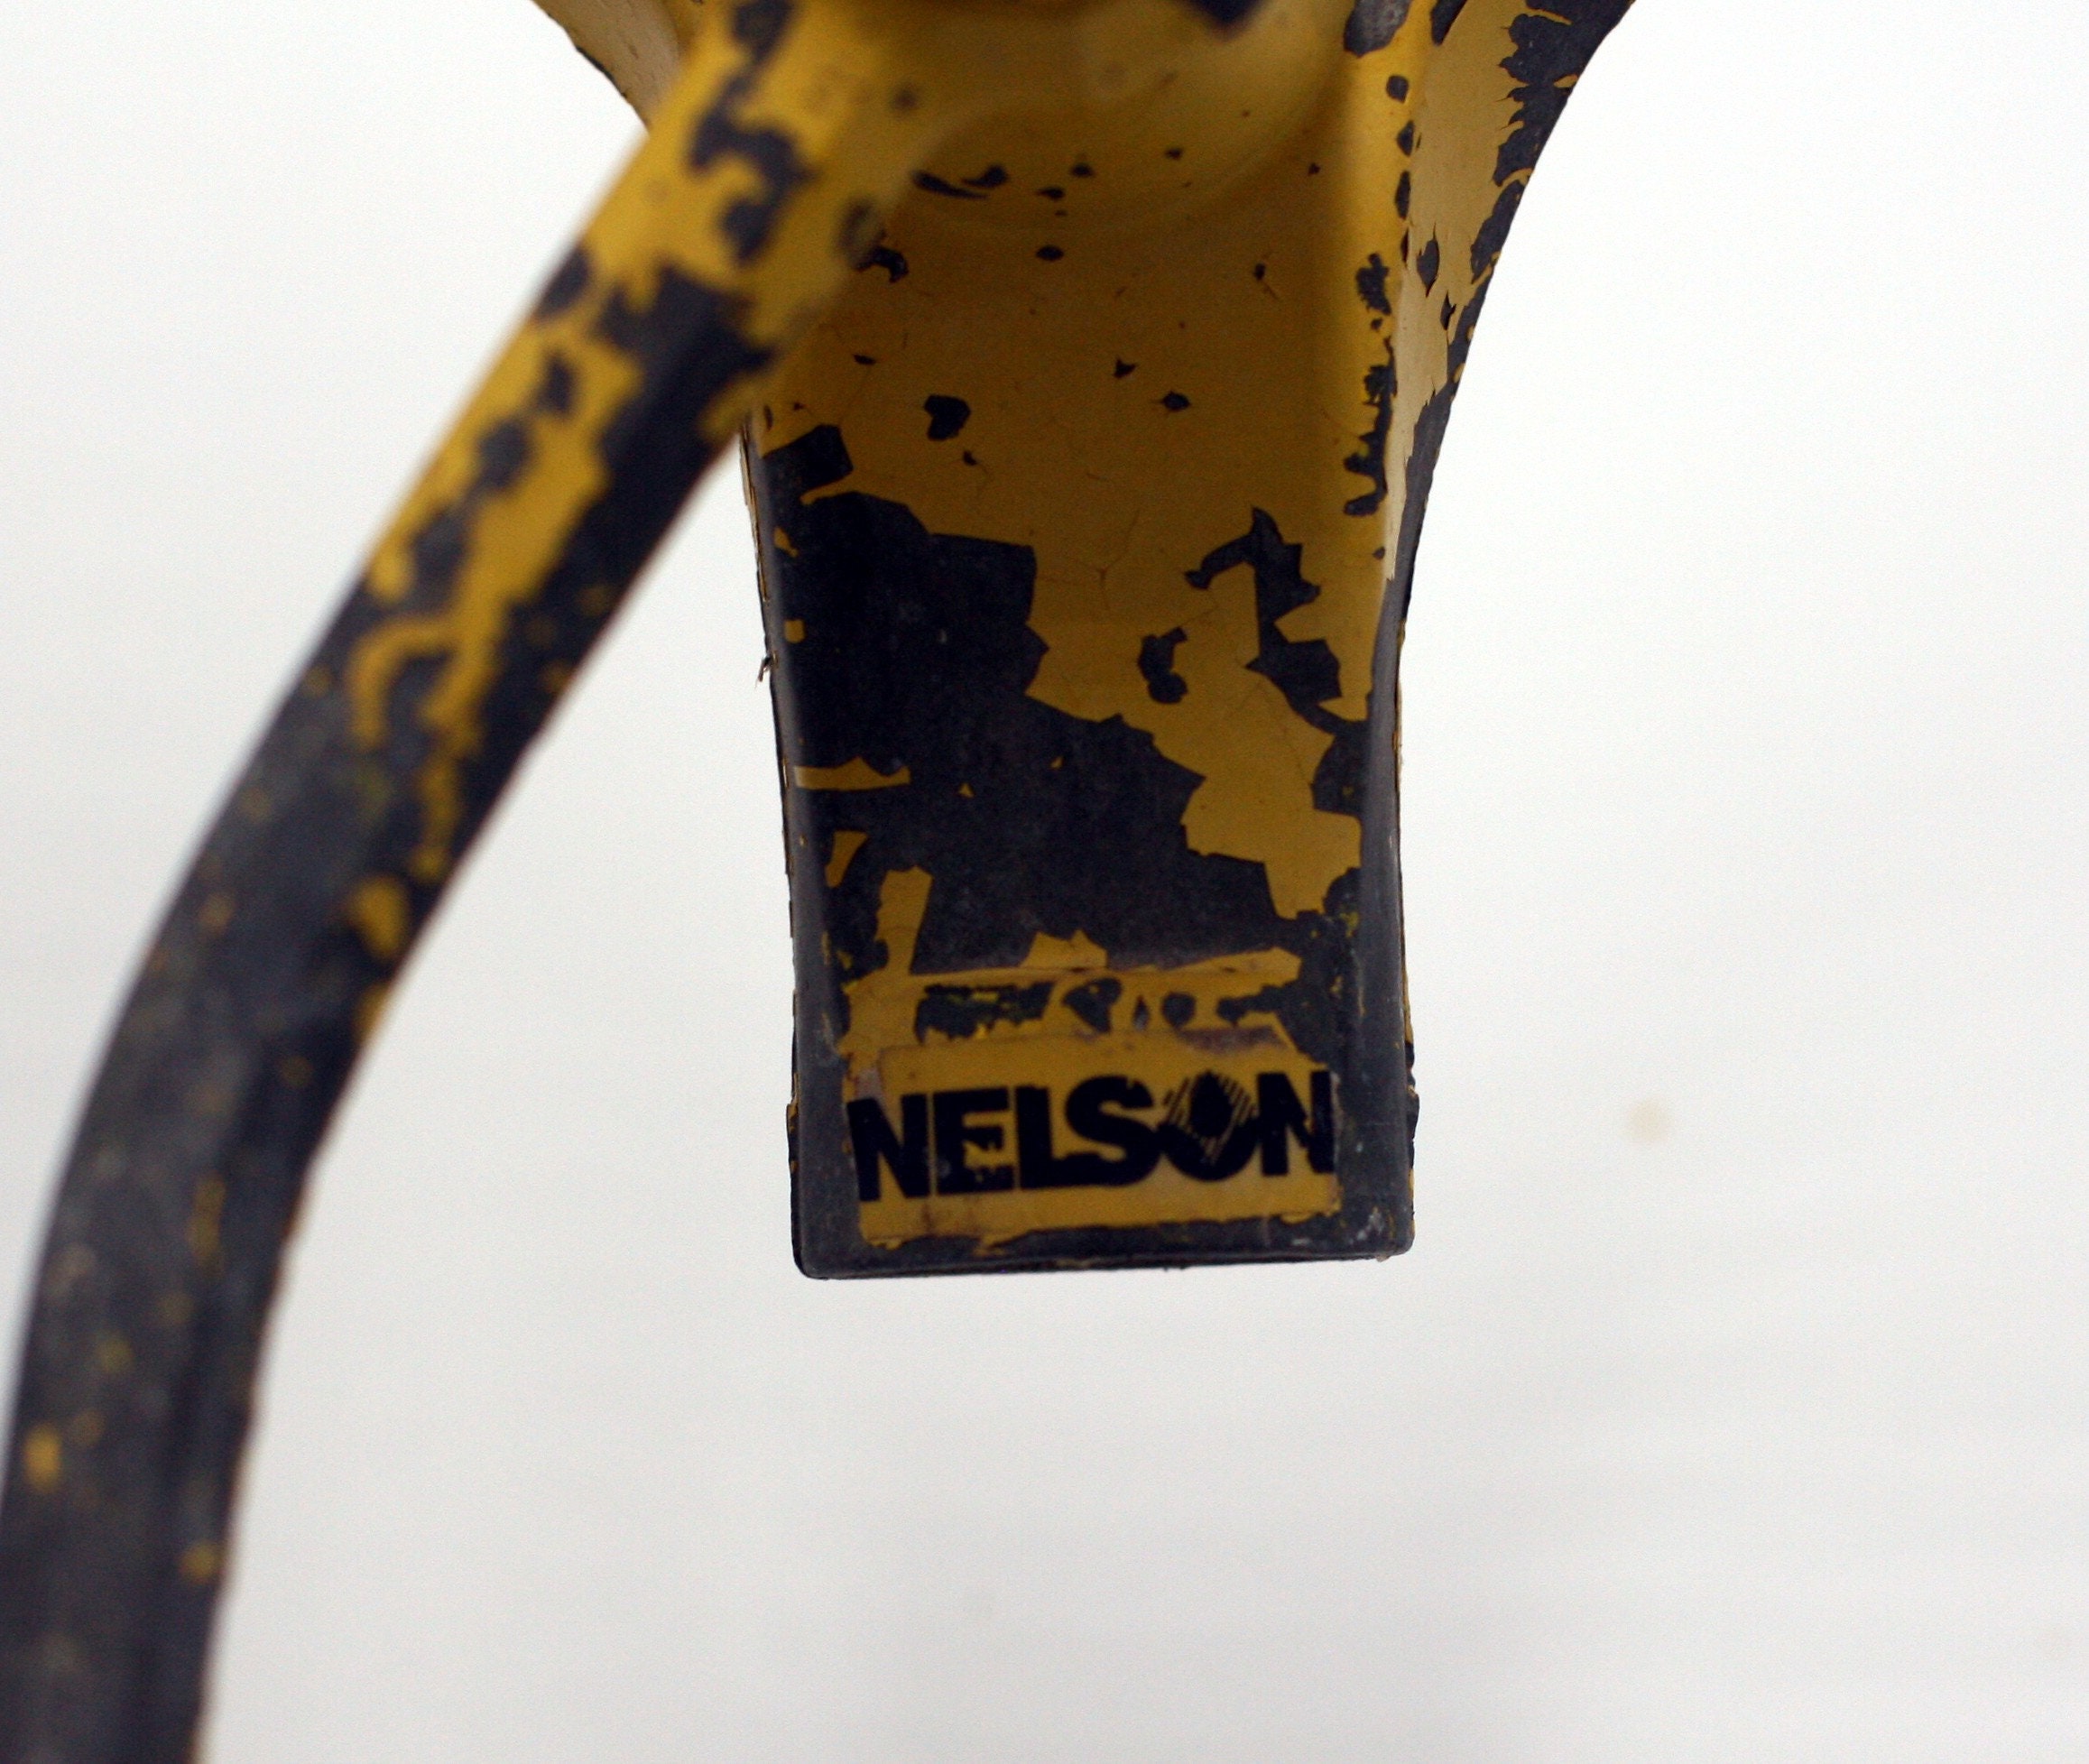 Nelson Type IV Yellow Metal Primer Gallon - The Nelson Paint Company